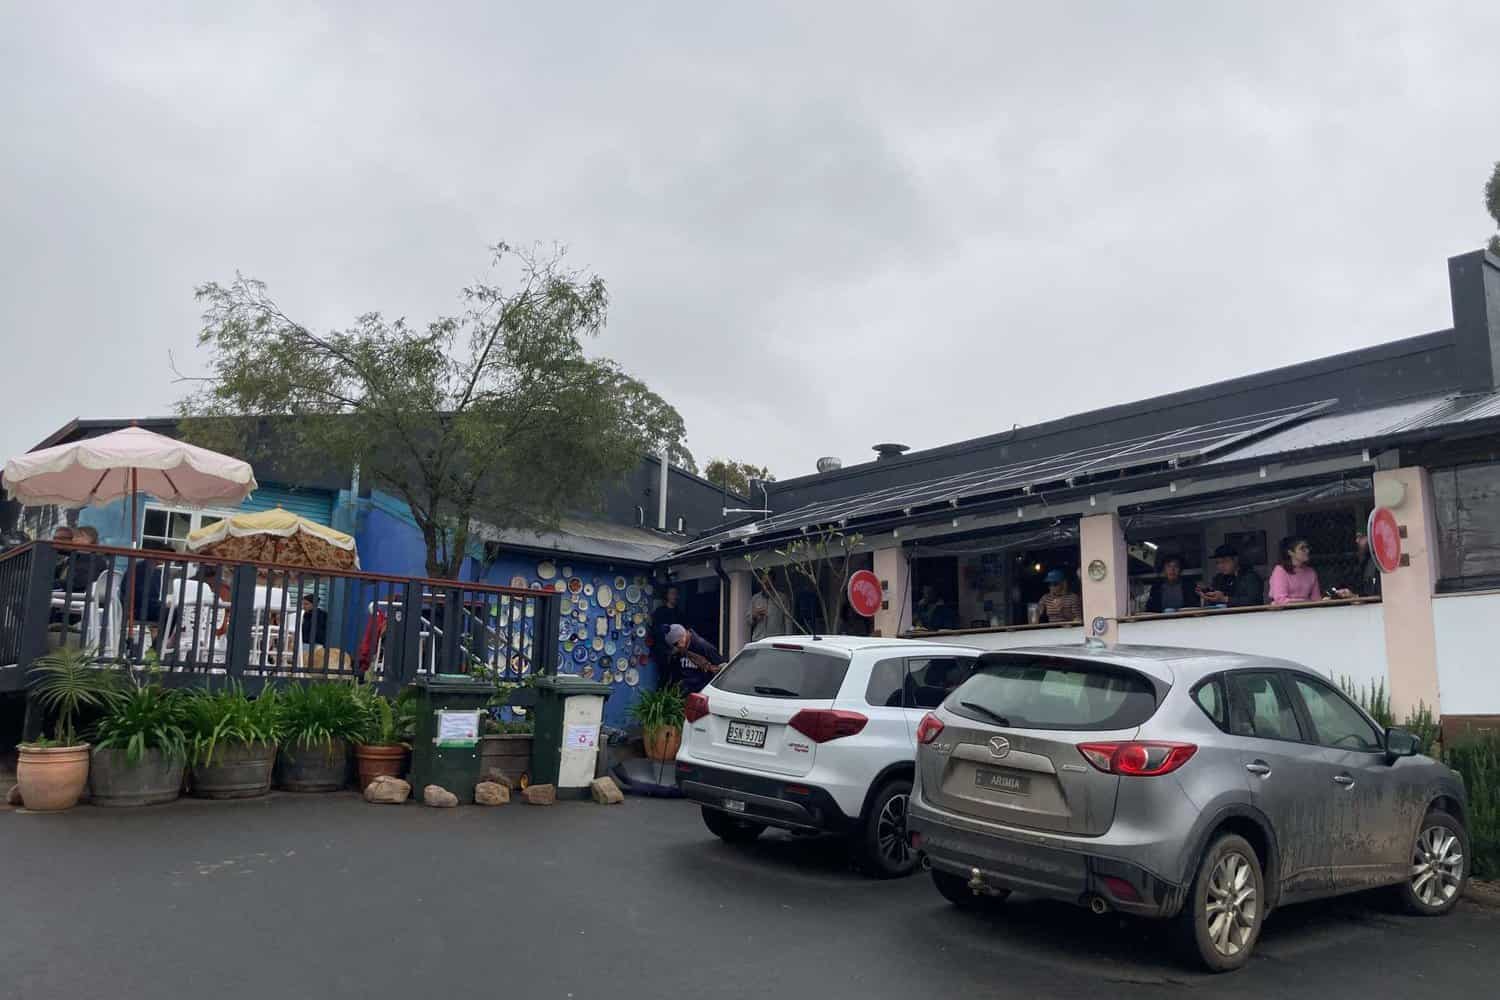 Margaret River Bakery, a popular spot for the best coffee in the region, where patrons enjoy their flavorful brews and tasty treats at outdoor seating.